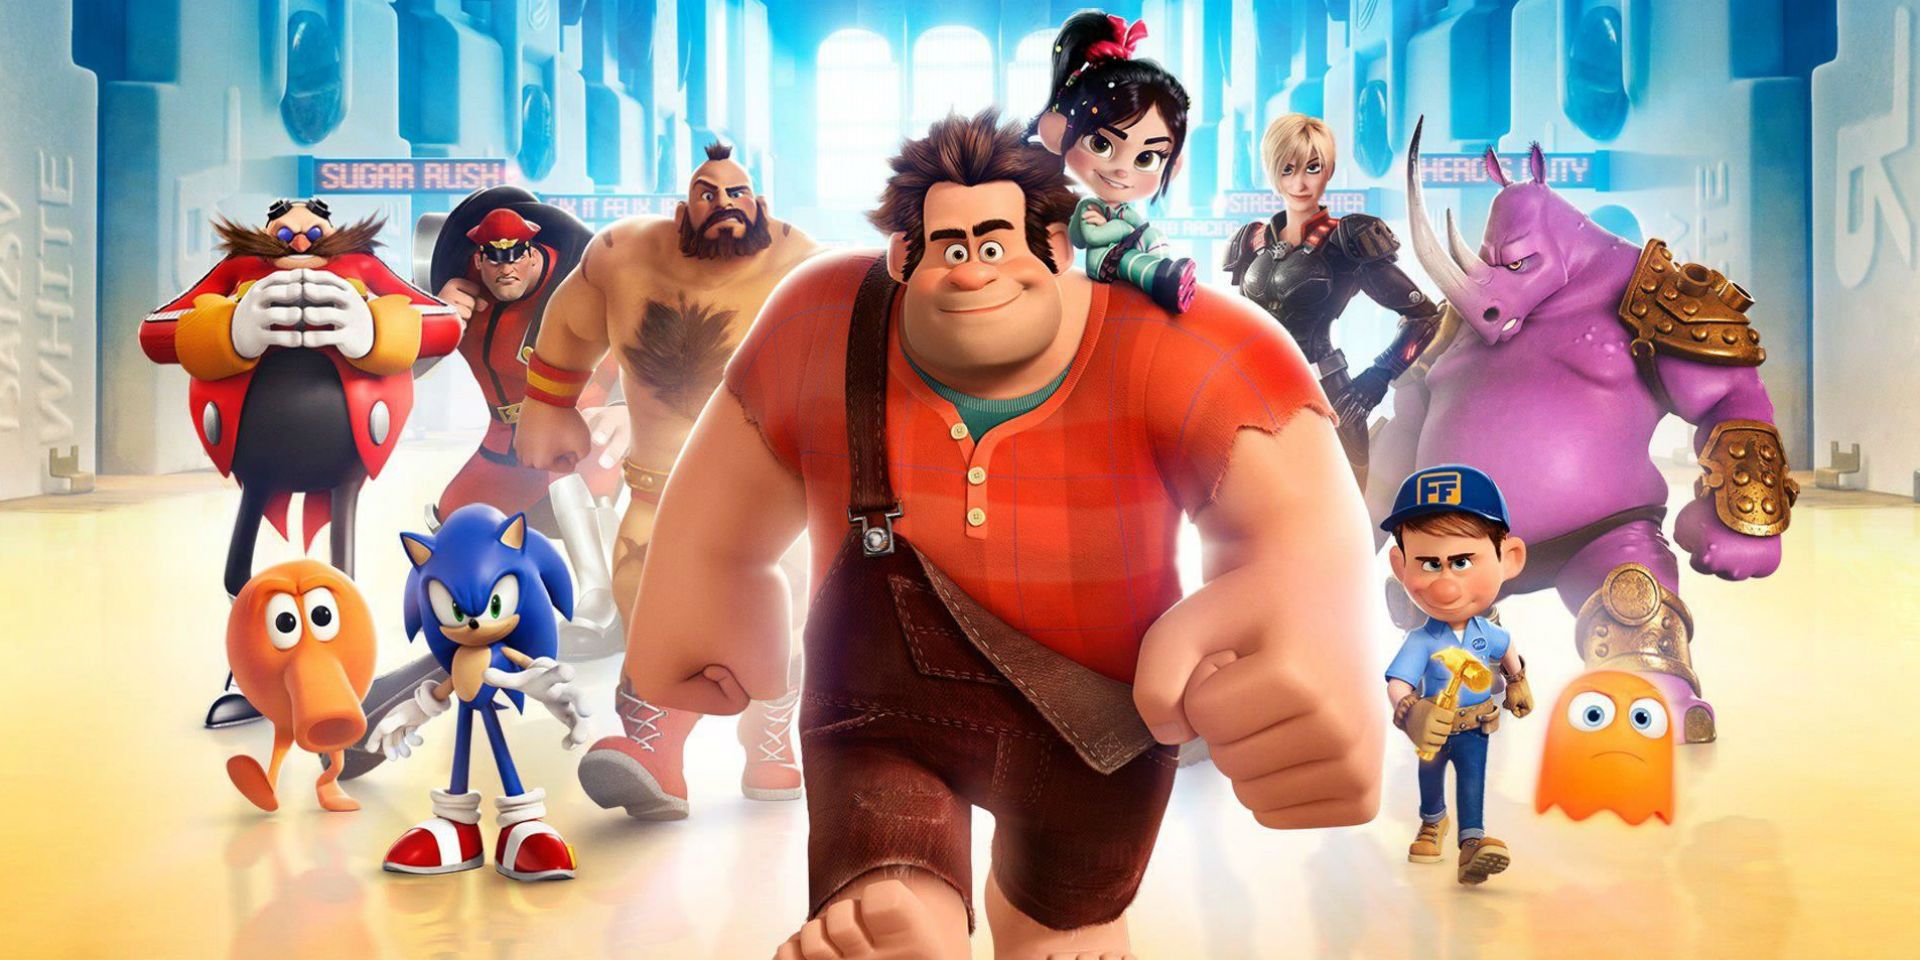 Wreck-It Ralph Voice Actors & Character Guide